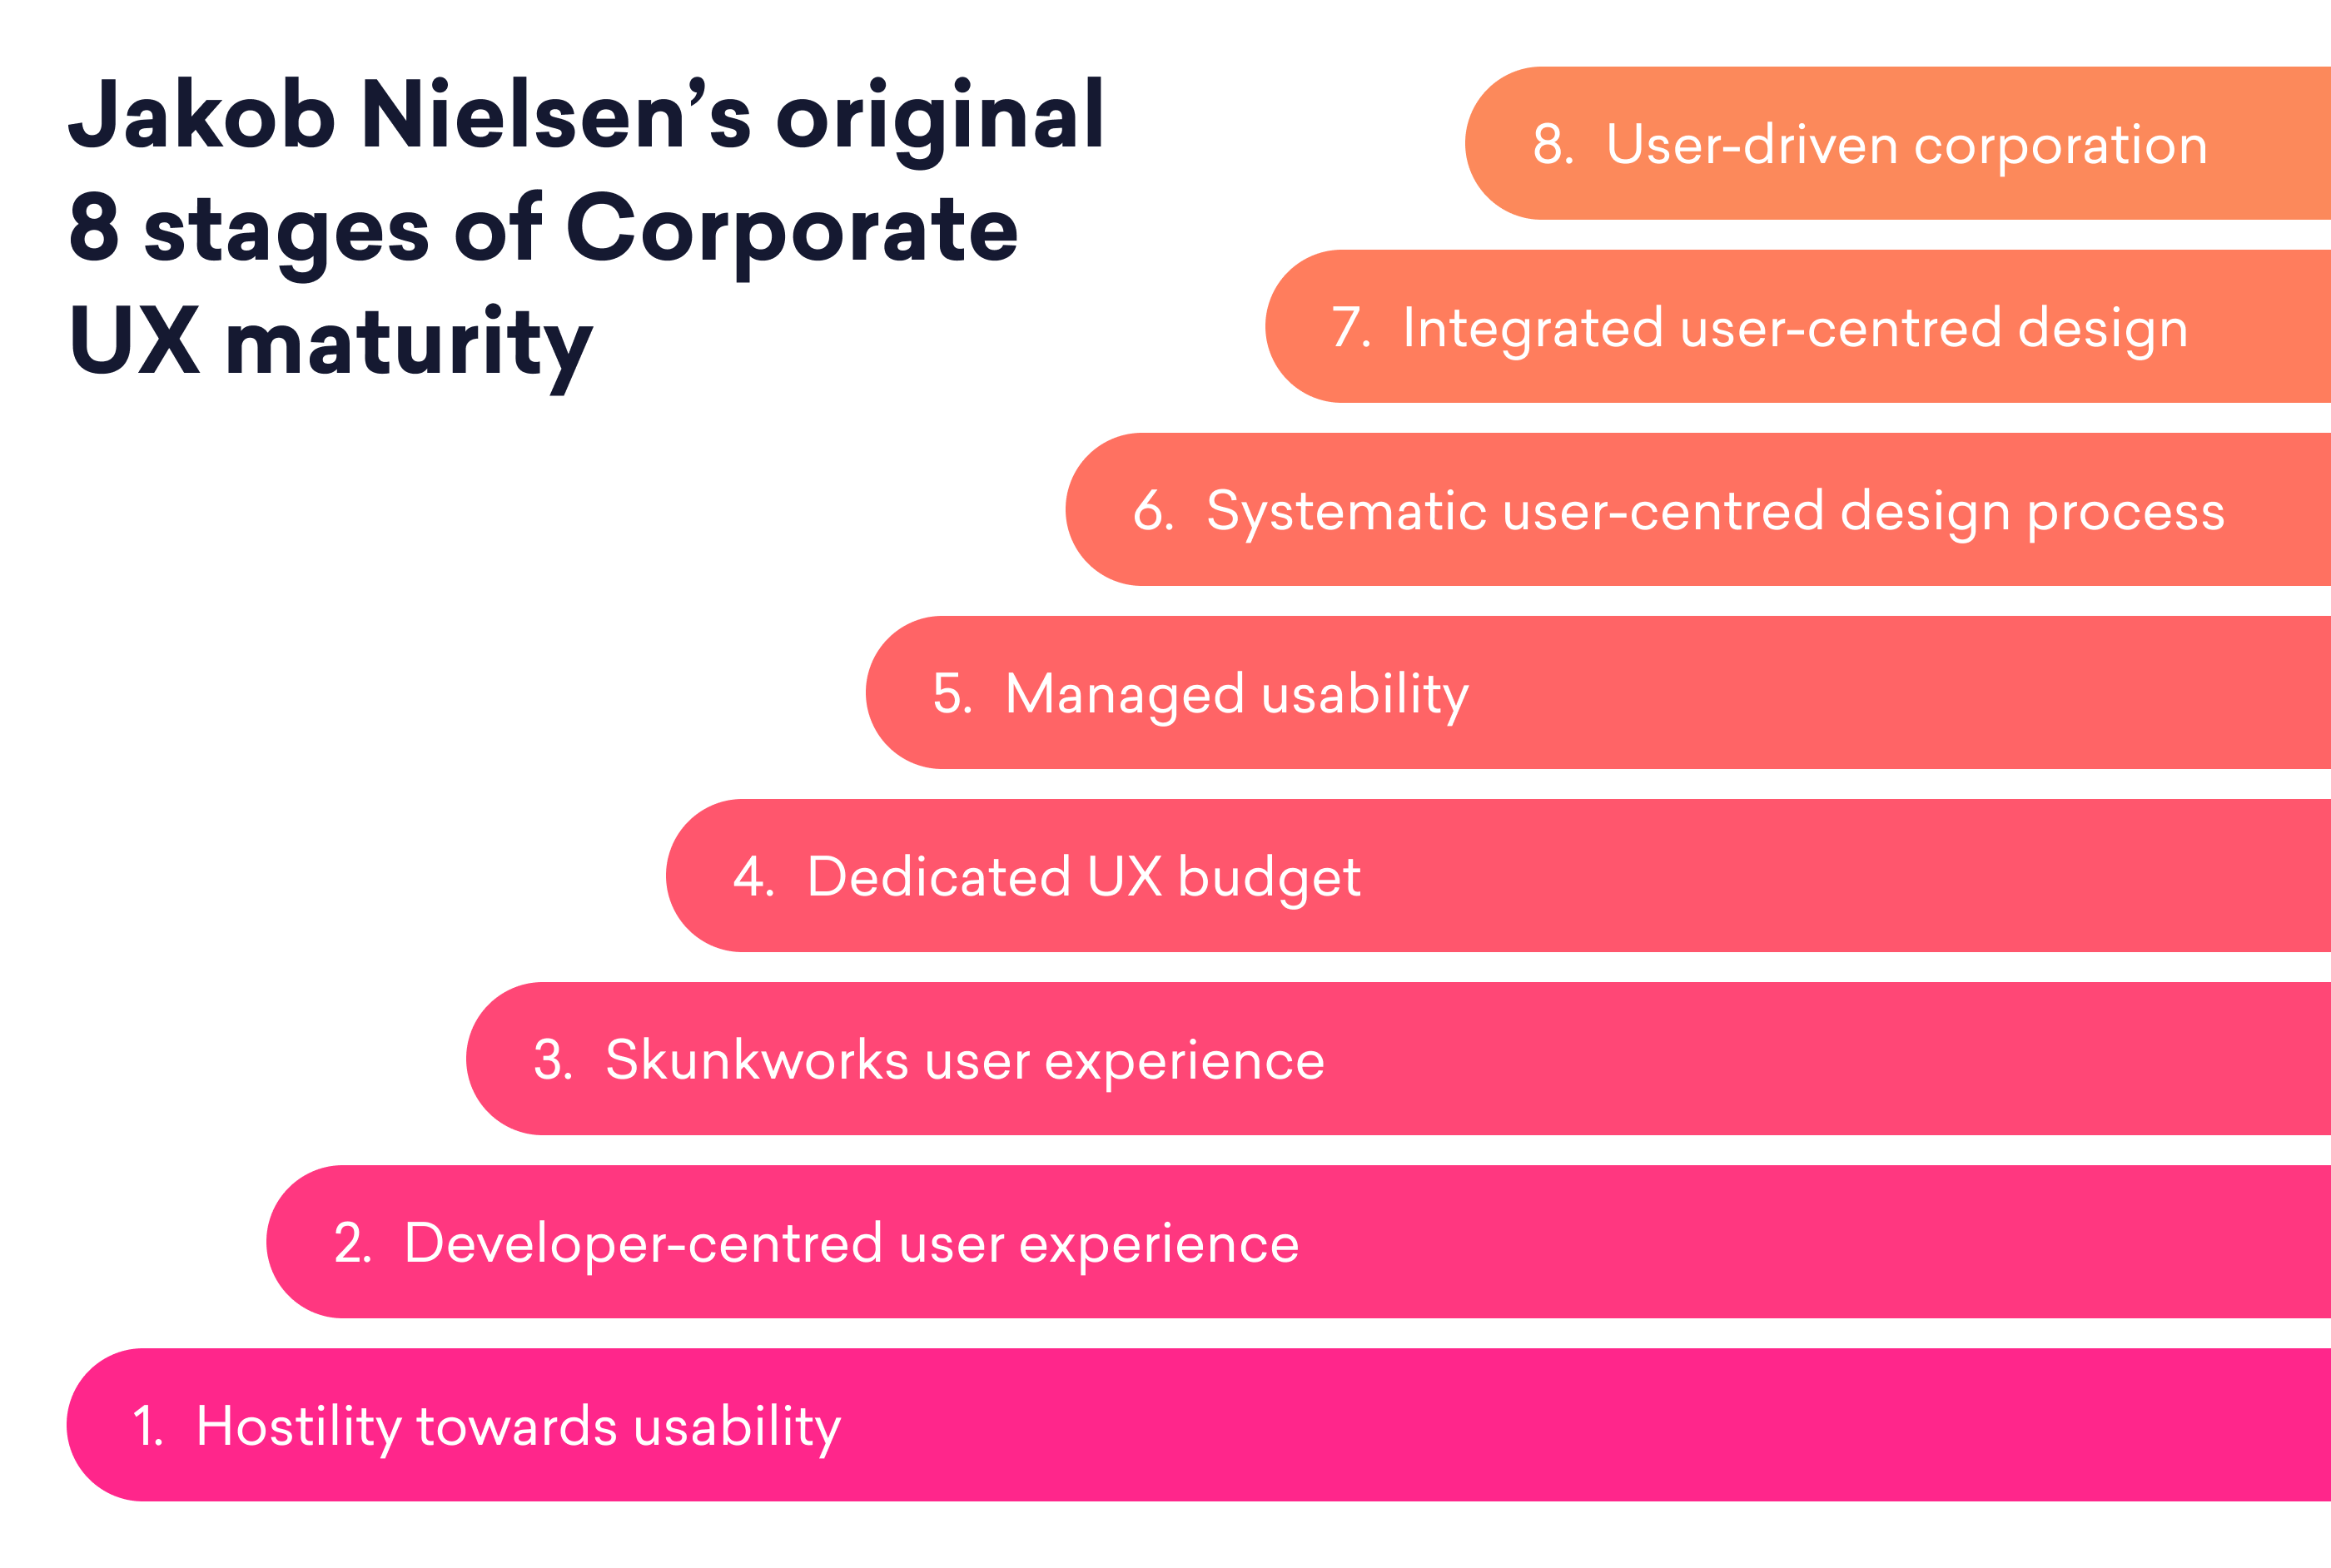 Jakob Nielsen's original 8 stages of Corporate UX maturity. 1. Hostility towards usability 2. Developer-centered user experience 3. Skunkworks user experience 4. Dedicated UX budget 5. Managed usability 6. Systematic user-centered design process 7. Integrated user-centered design 8. User-driven corporation